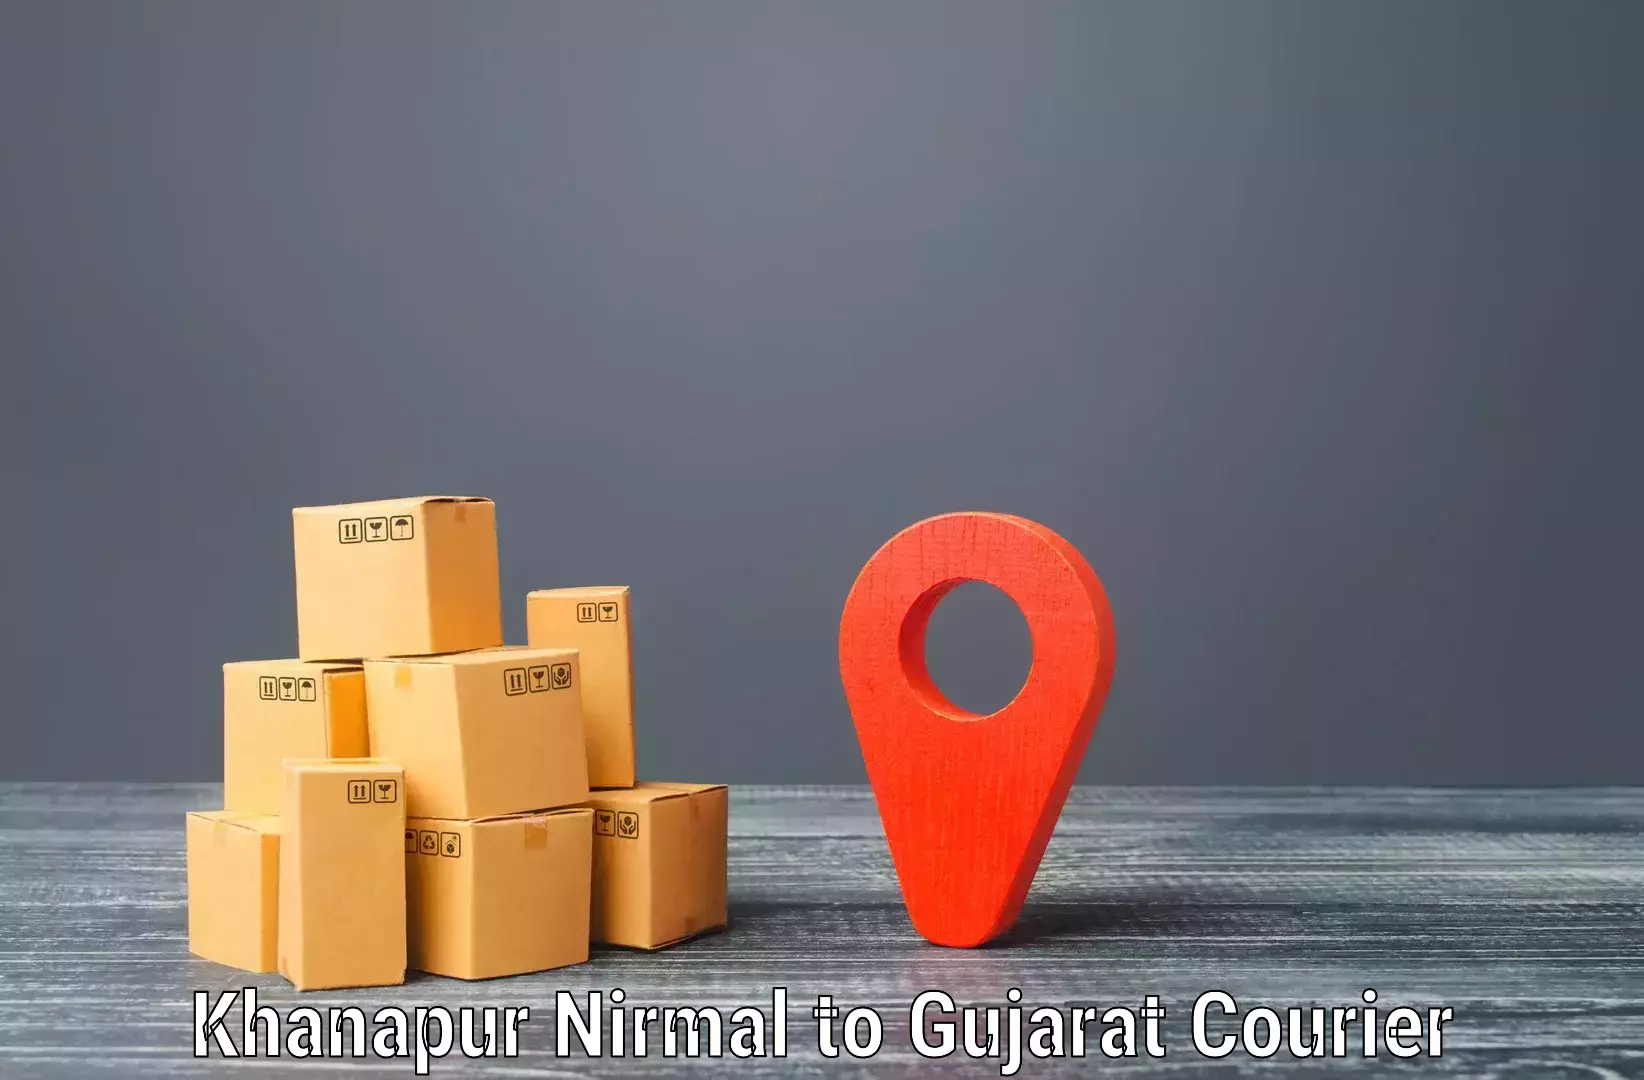 Reliable delivery network Khanapur Nirmal to Panchmahal